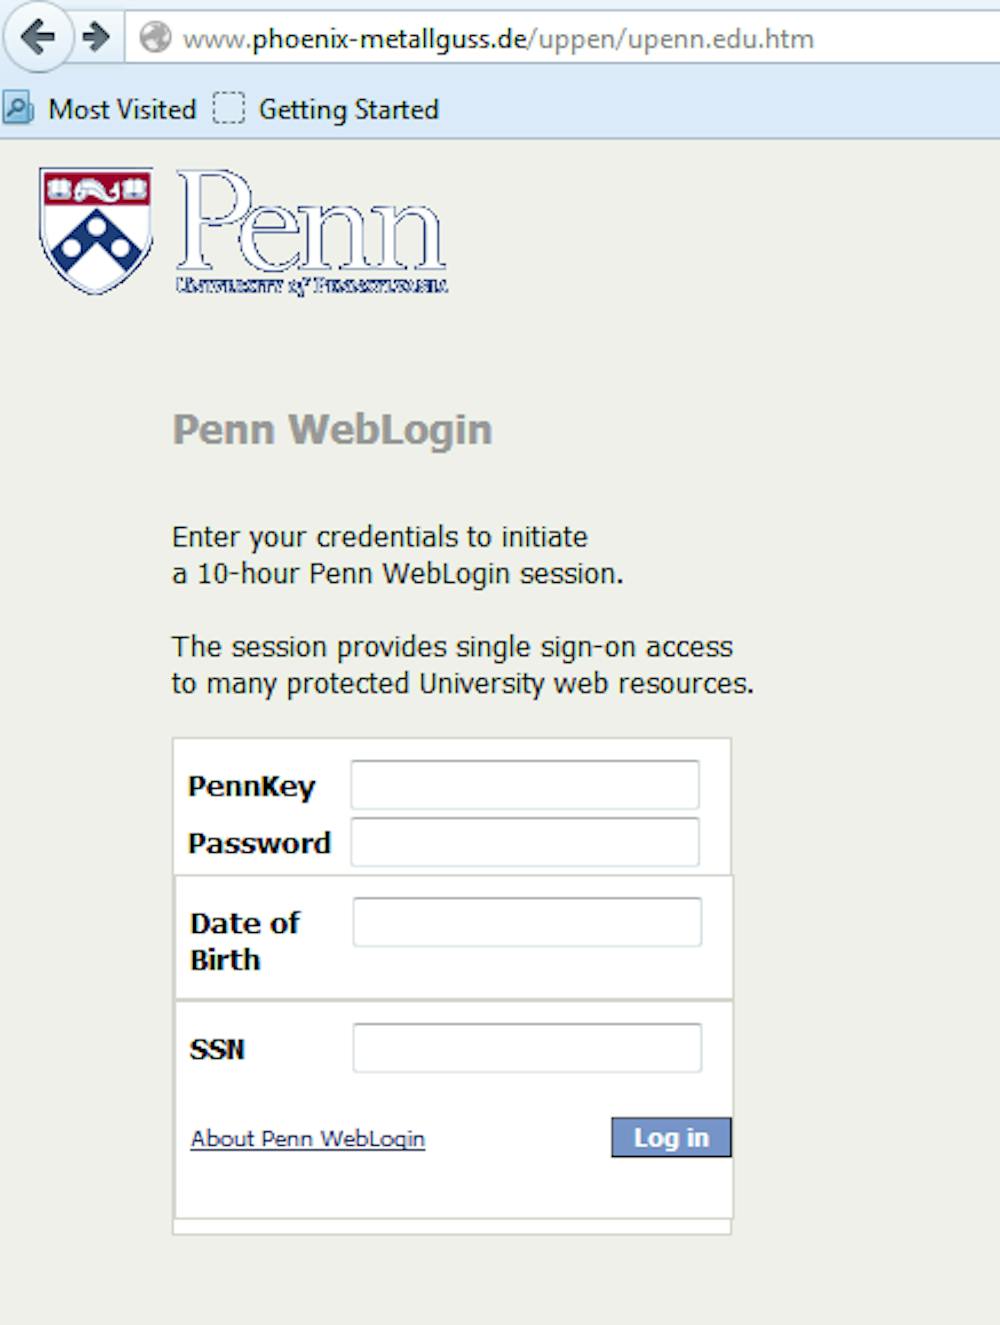 	A phishing scheme targeting Penn affiliates is designed to look like a secure Penn login screen. This screenshot was sent in an email by Information Systems & Computing.